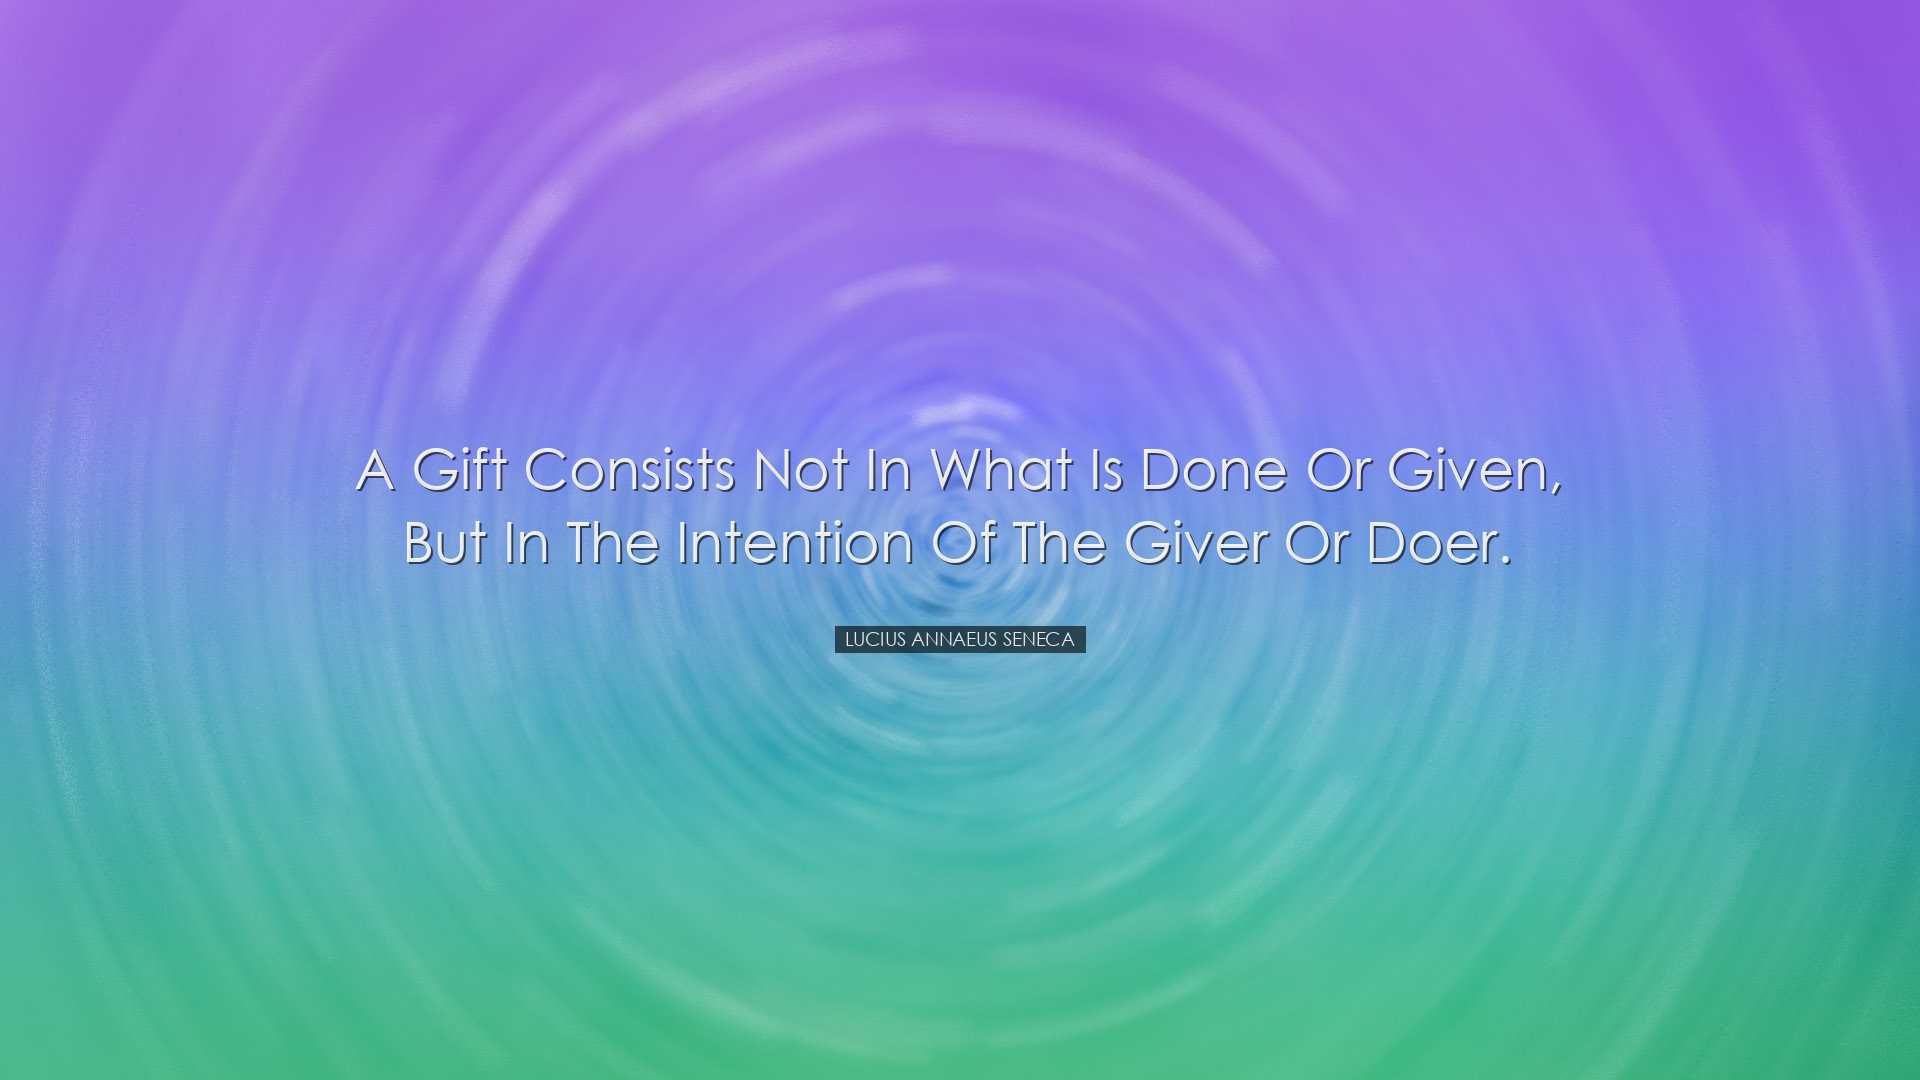 A gift consists not in what is done or given, but in the intention